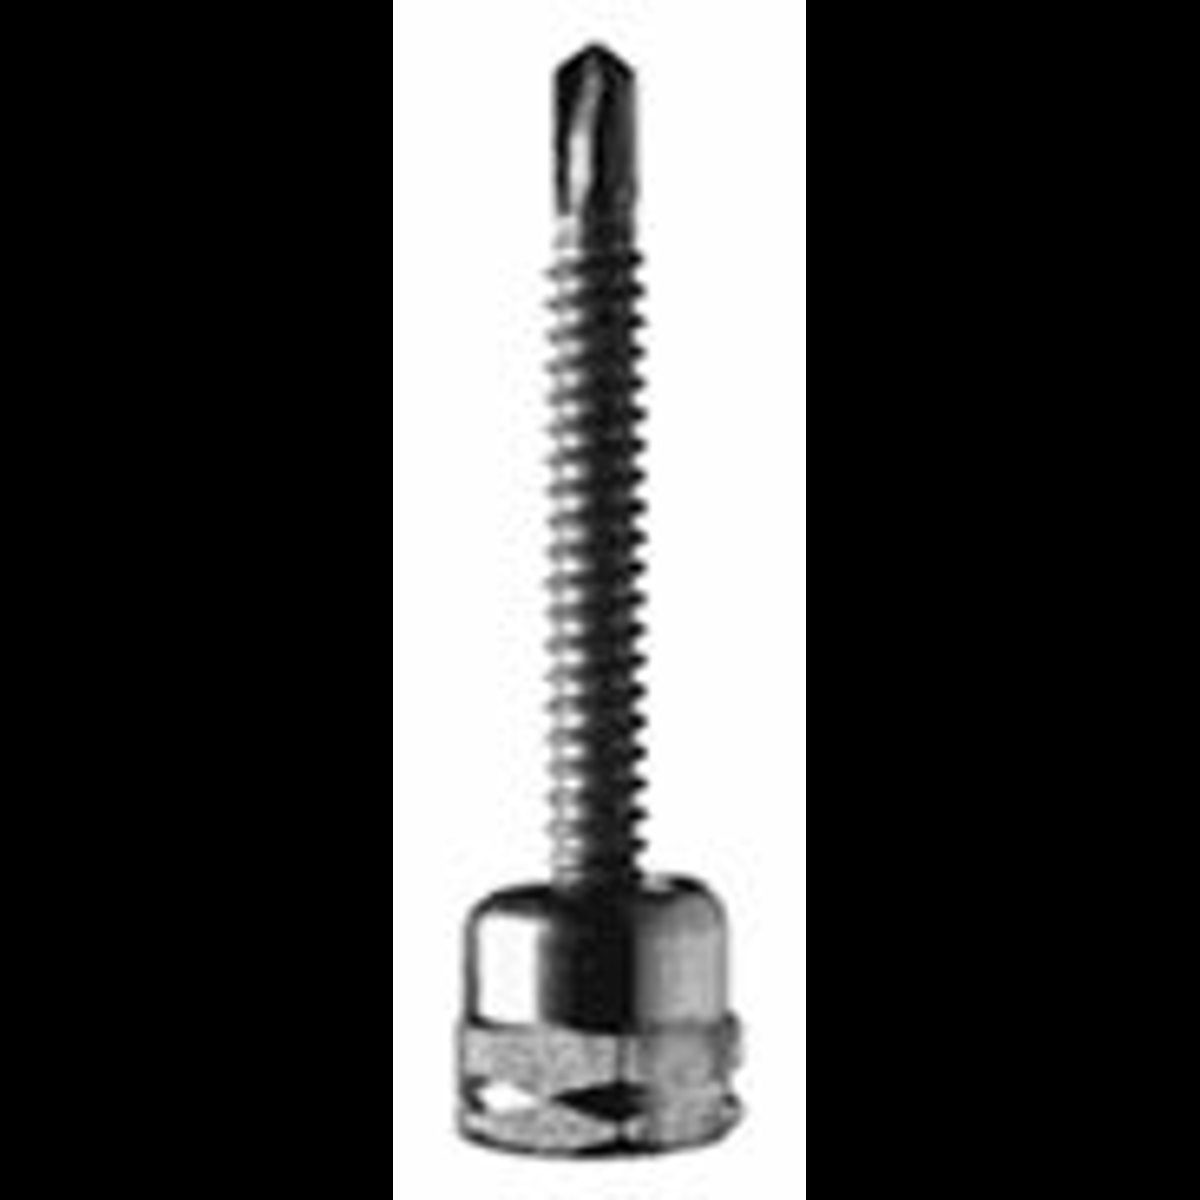 Minerallac  Electrical Construction Hardware Manufacturer & Supplier. Screw  Hooks